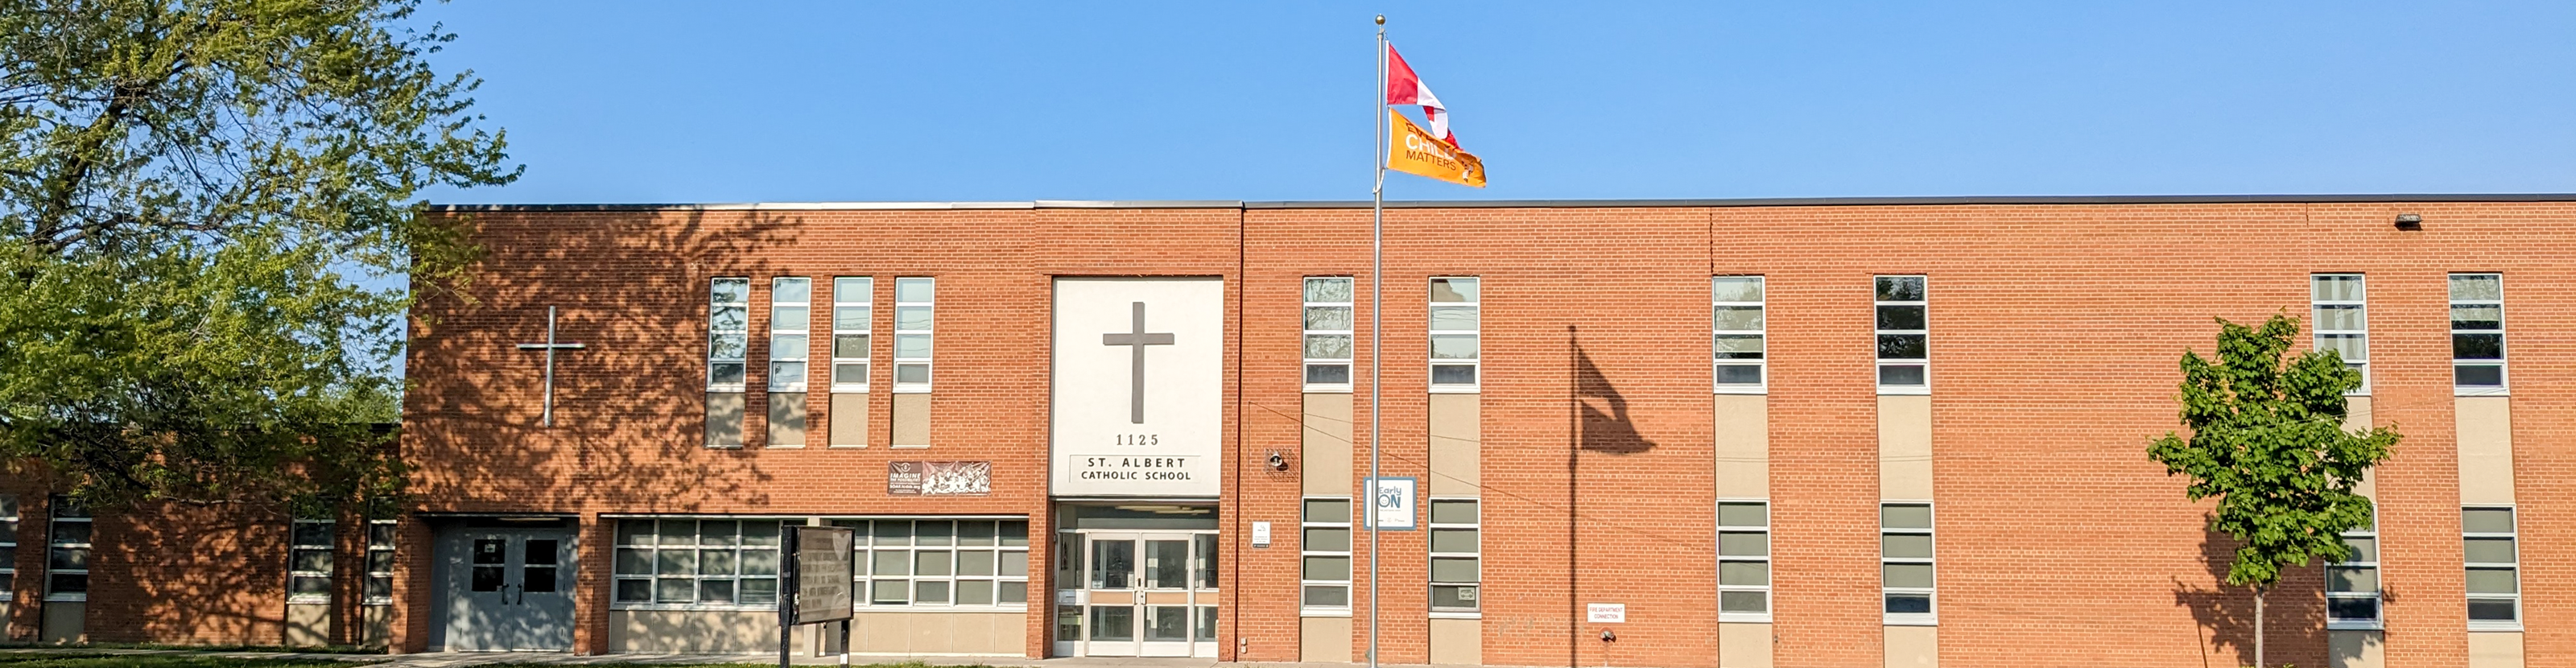 The front of the St. Albert Catholic School building